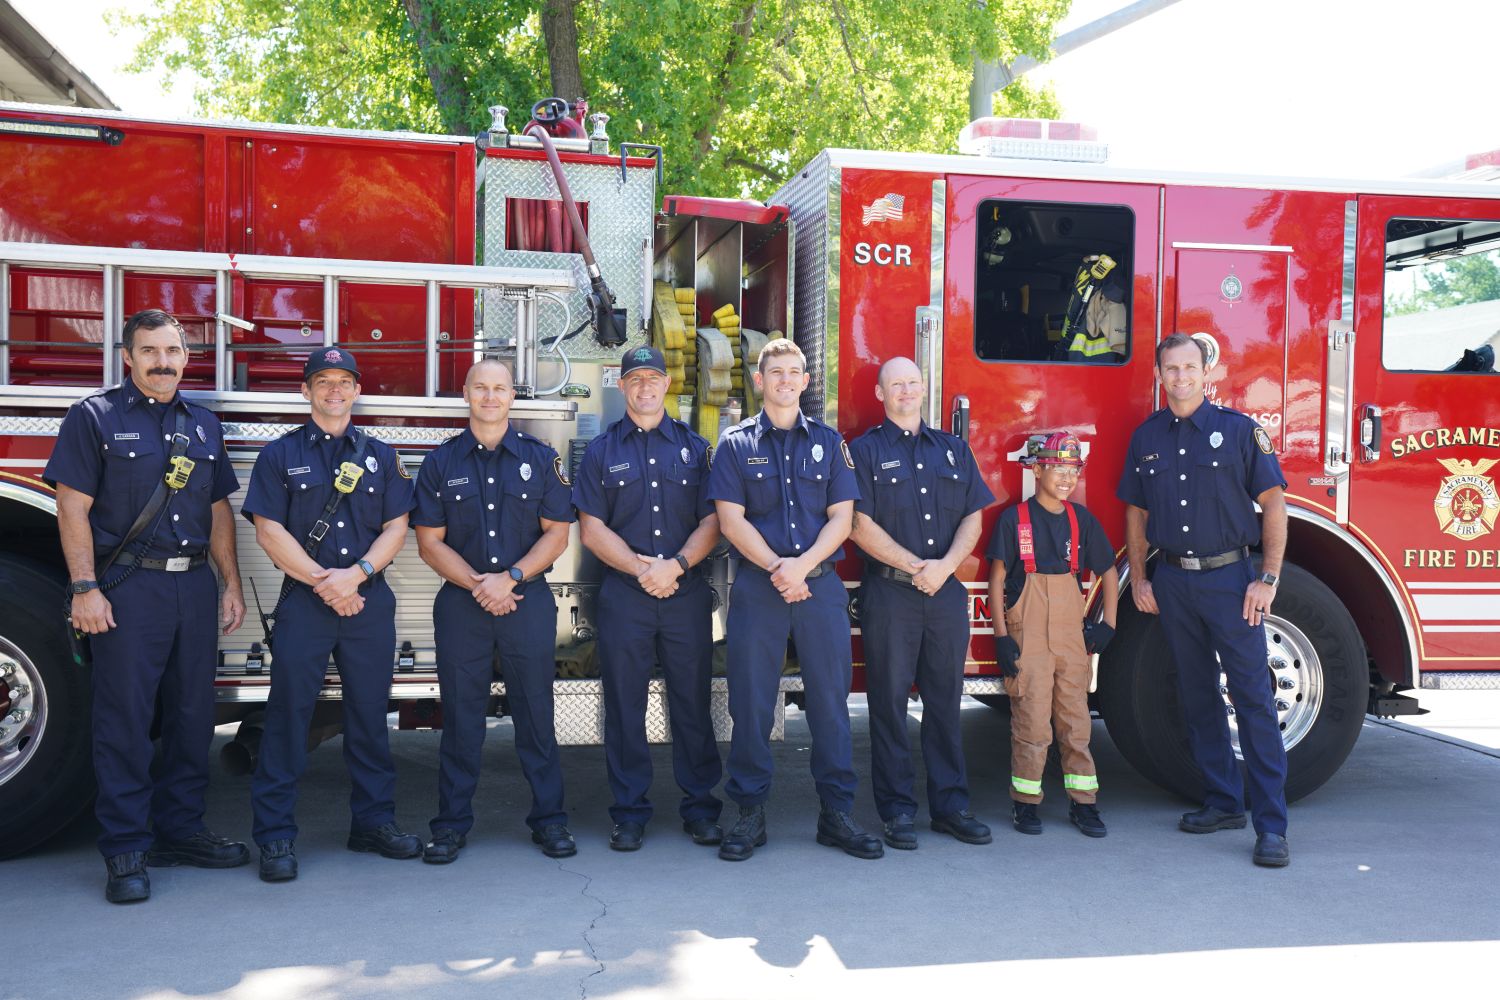 SEVEN FIREFIGHTERS LINED UP WITH A KID IN FRONT OF A FIRE ENGINE